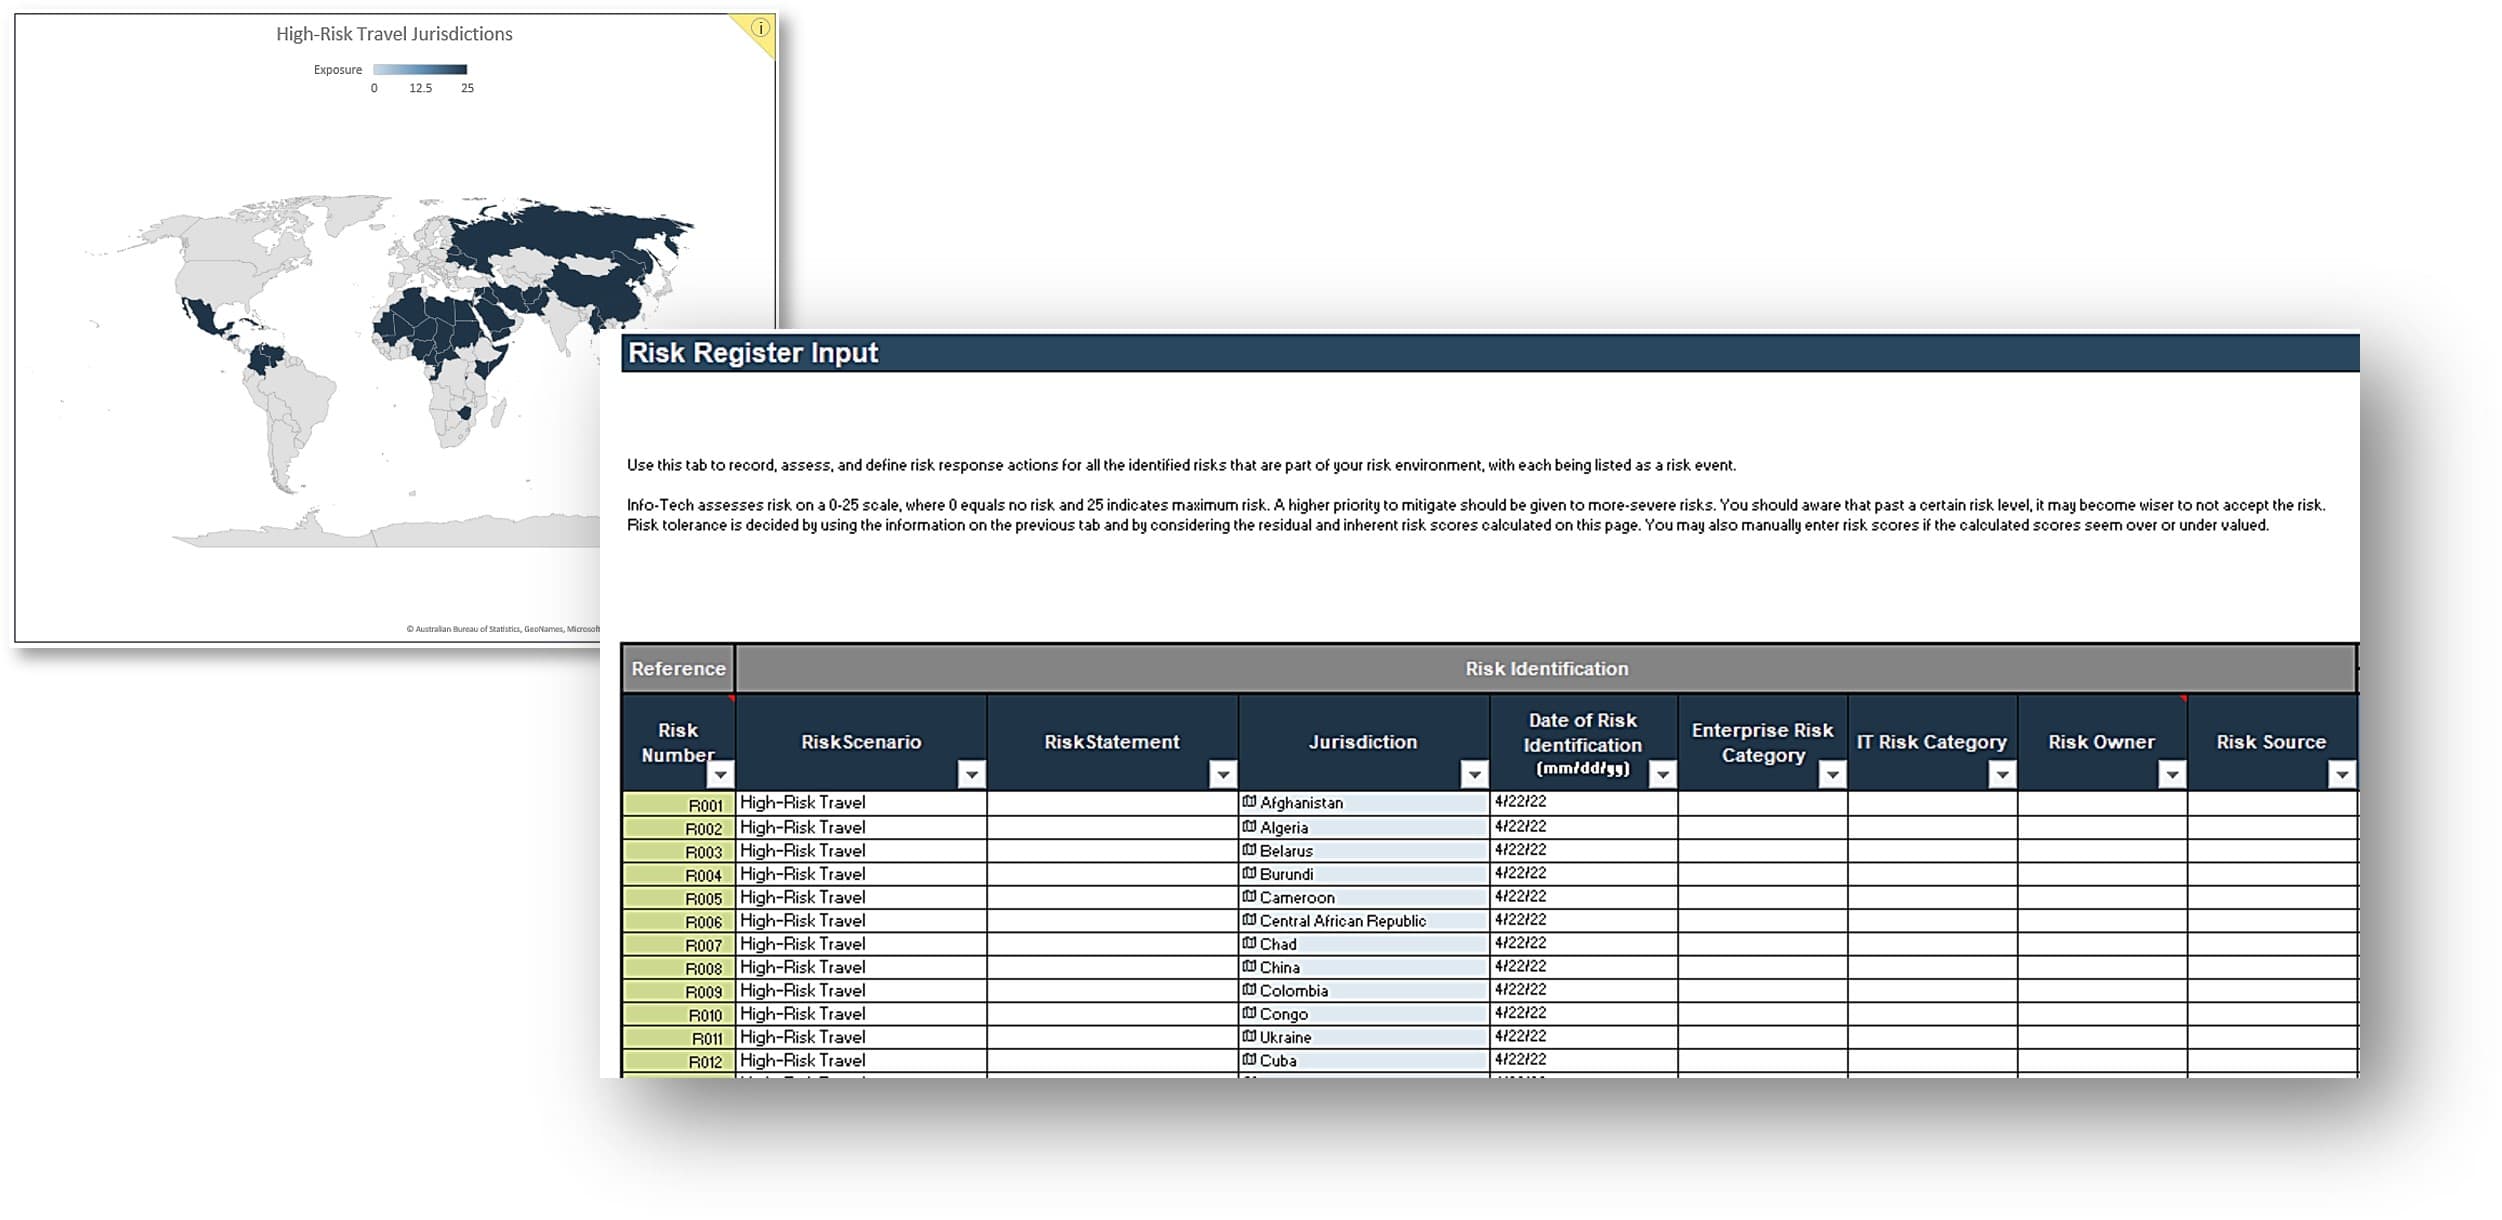 The image includes two screenshots of the Jurisdictional Risk Register and Heatmap Tool.